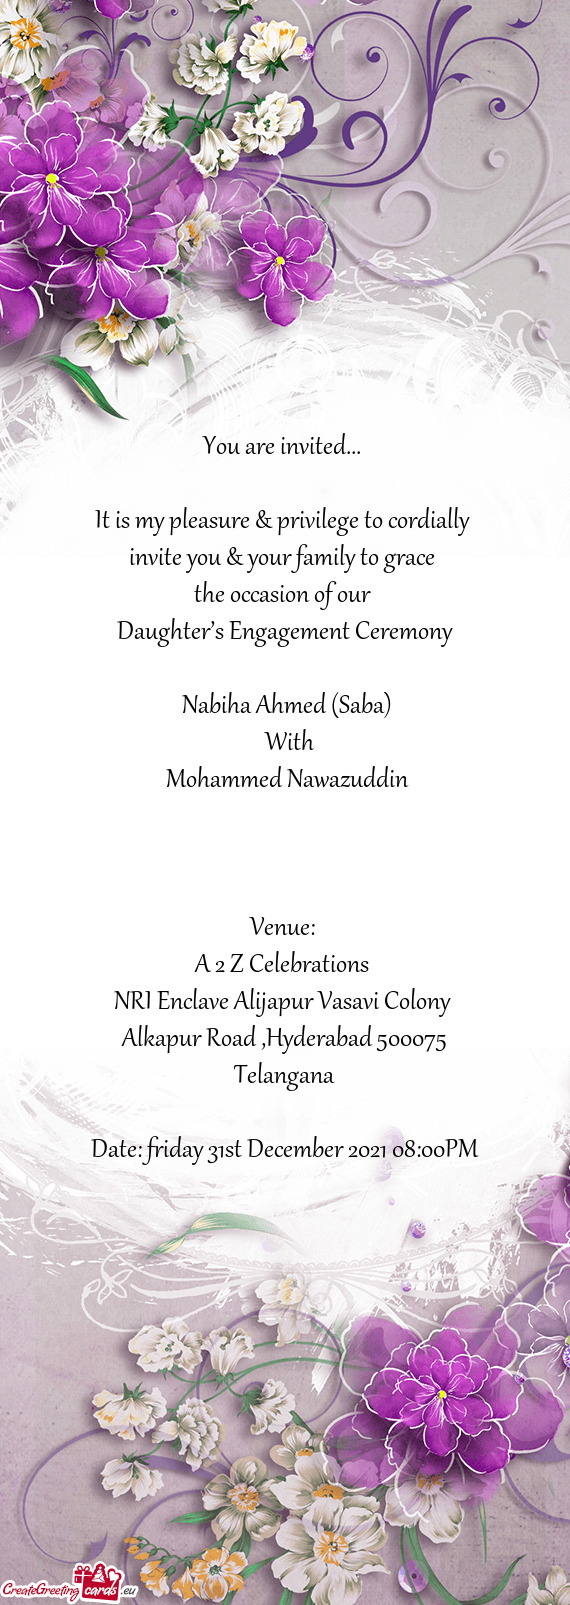 It is my pleasure & privilege to cordially 
 invite you & your family to grace 
 the occasion o